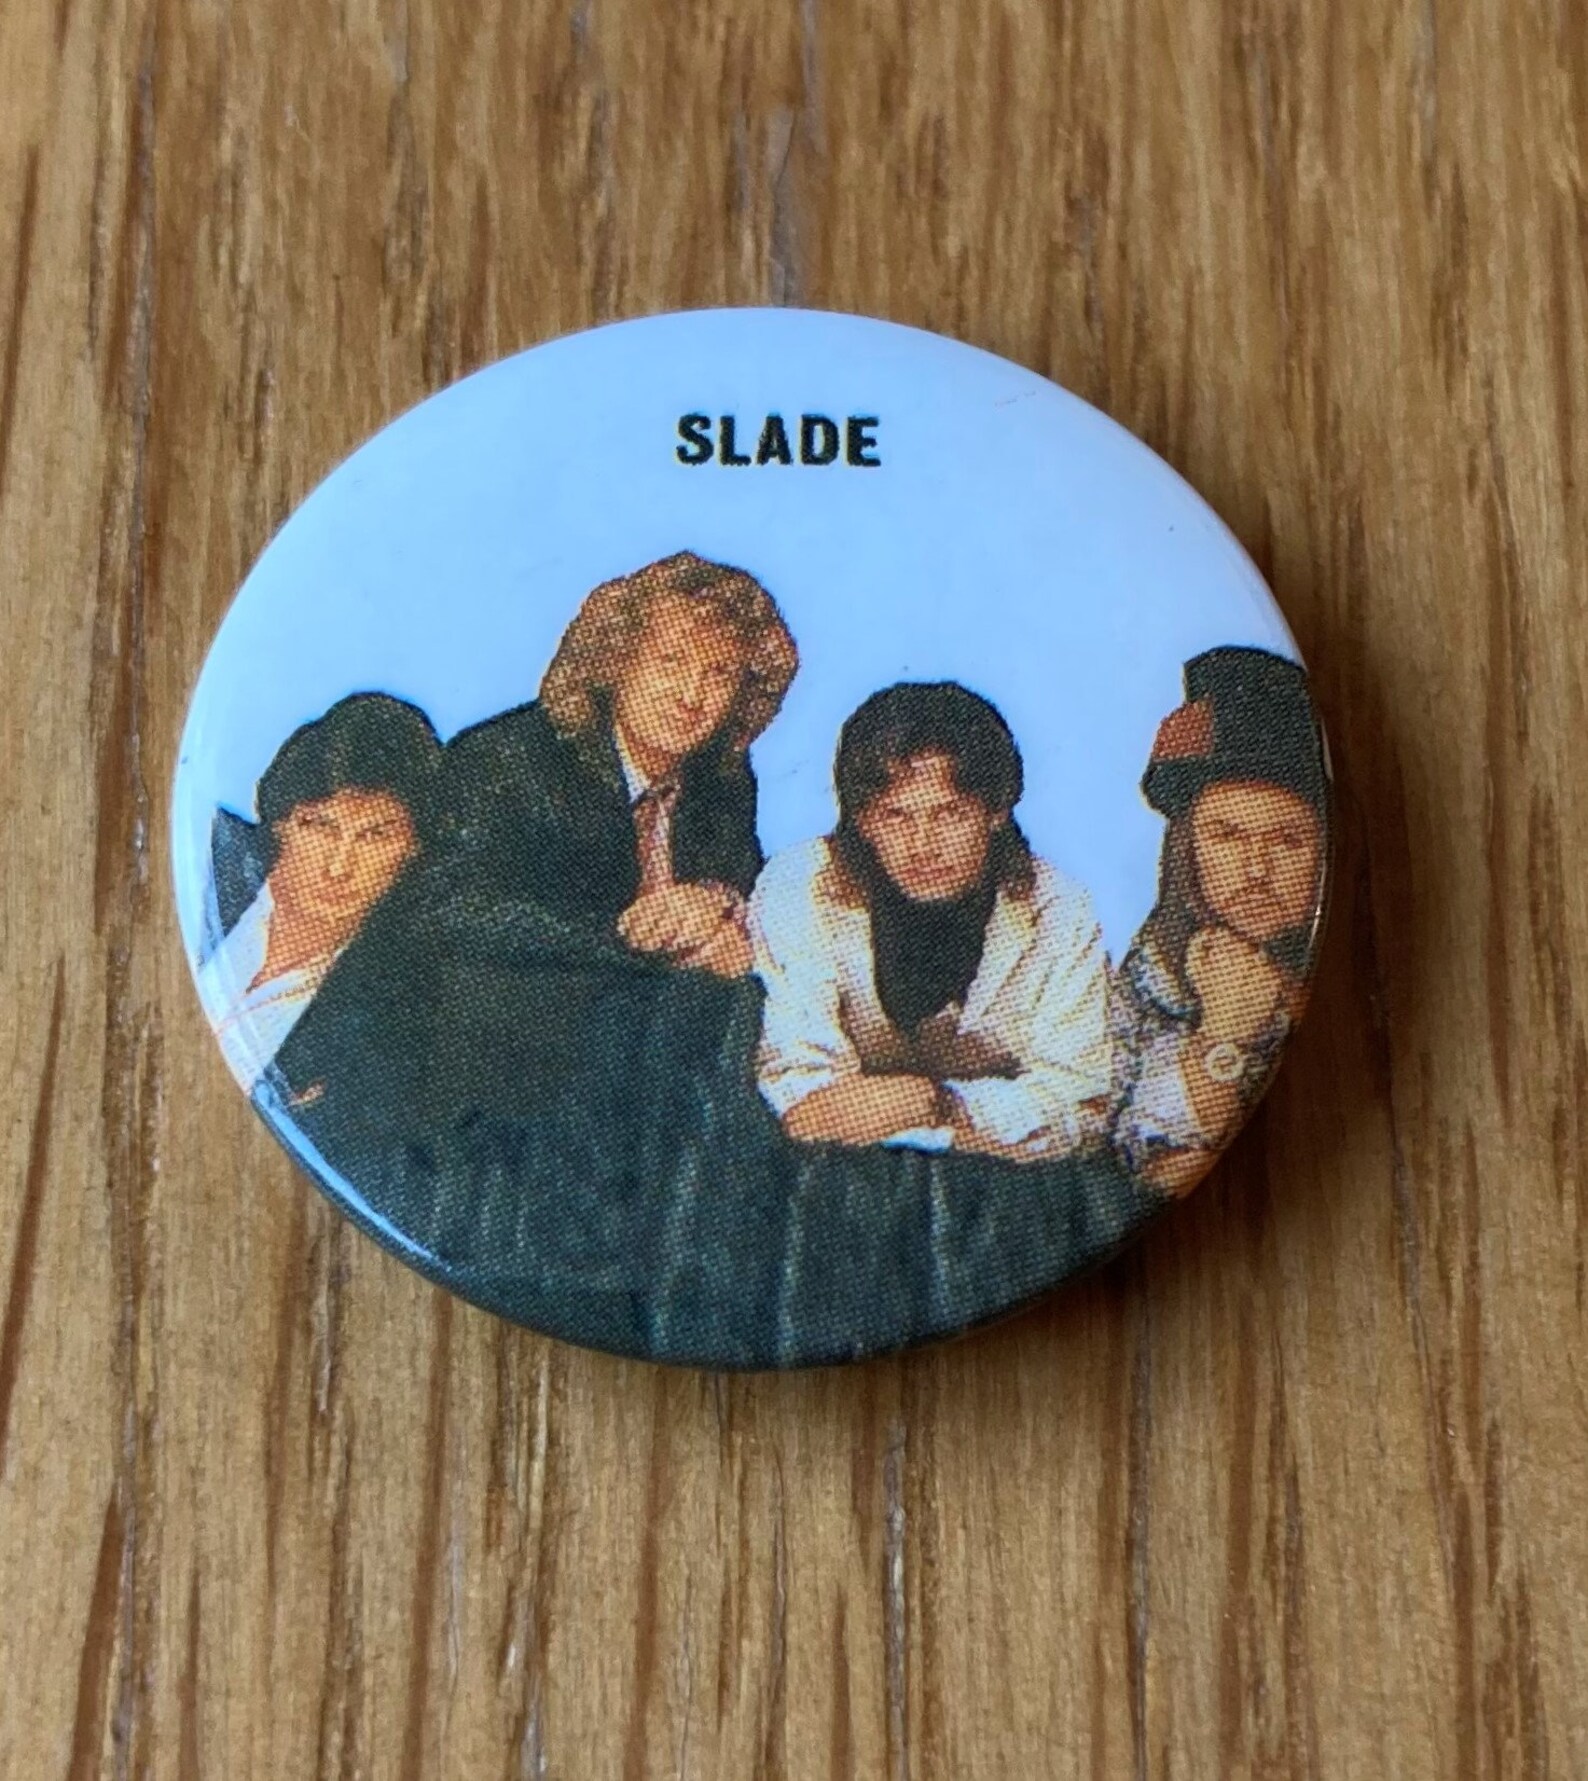 SLADE Vintage Button Style Metal Pin Badge From The 1980's | Etsy